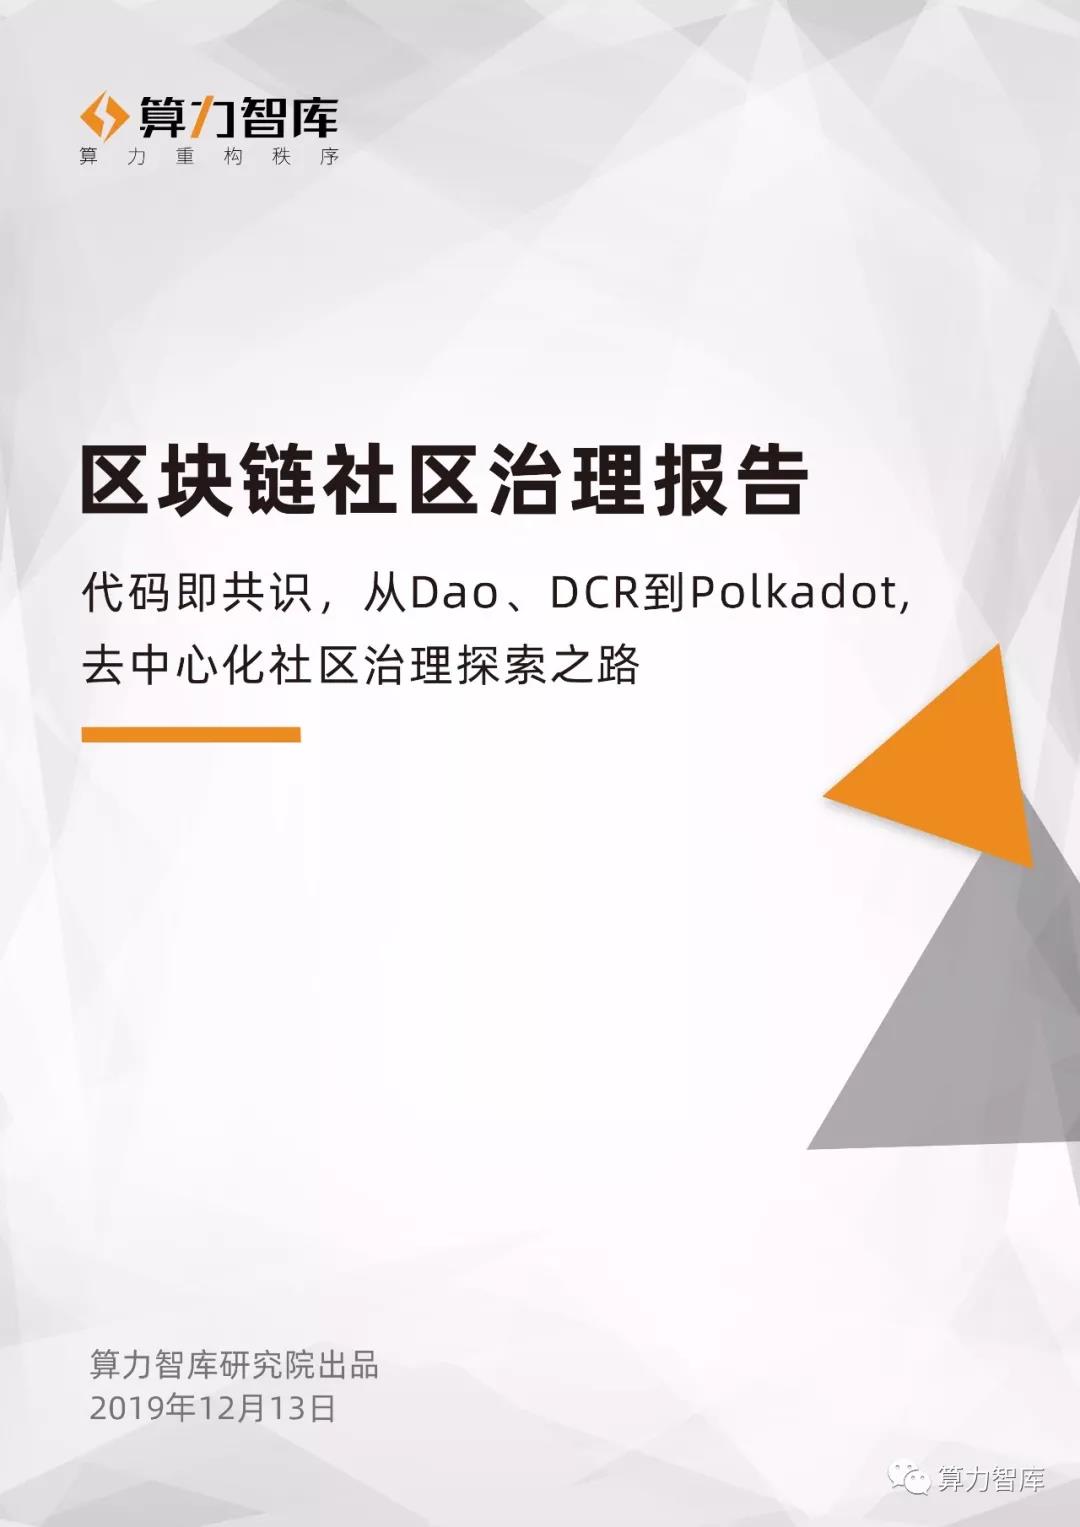 Research report | Observation of the exploration of decentralized community governance from DAO, DCR to Polkadot